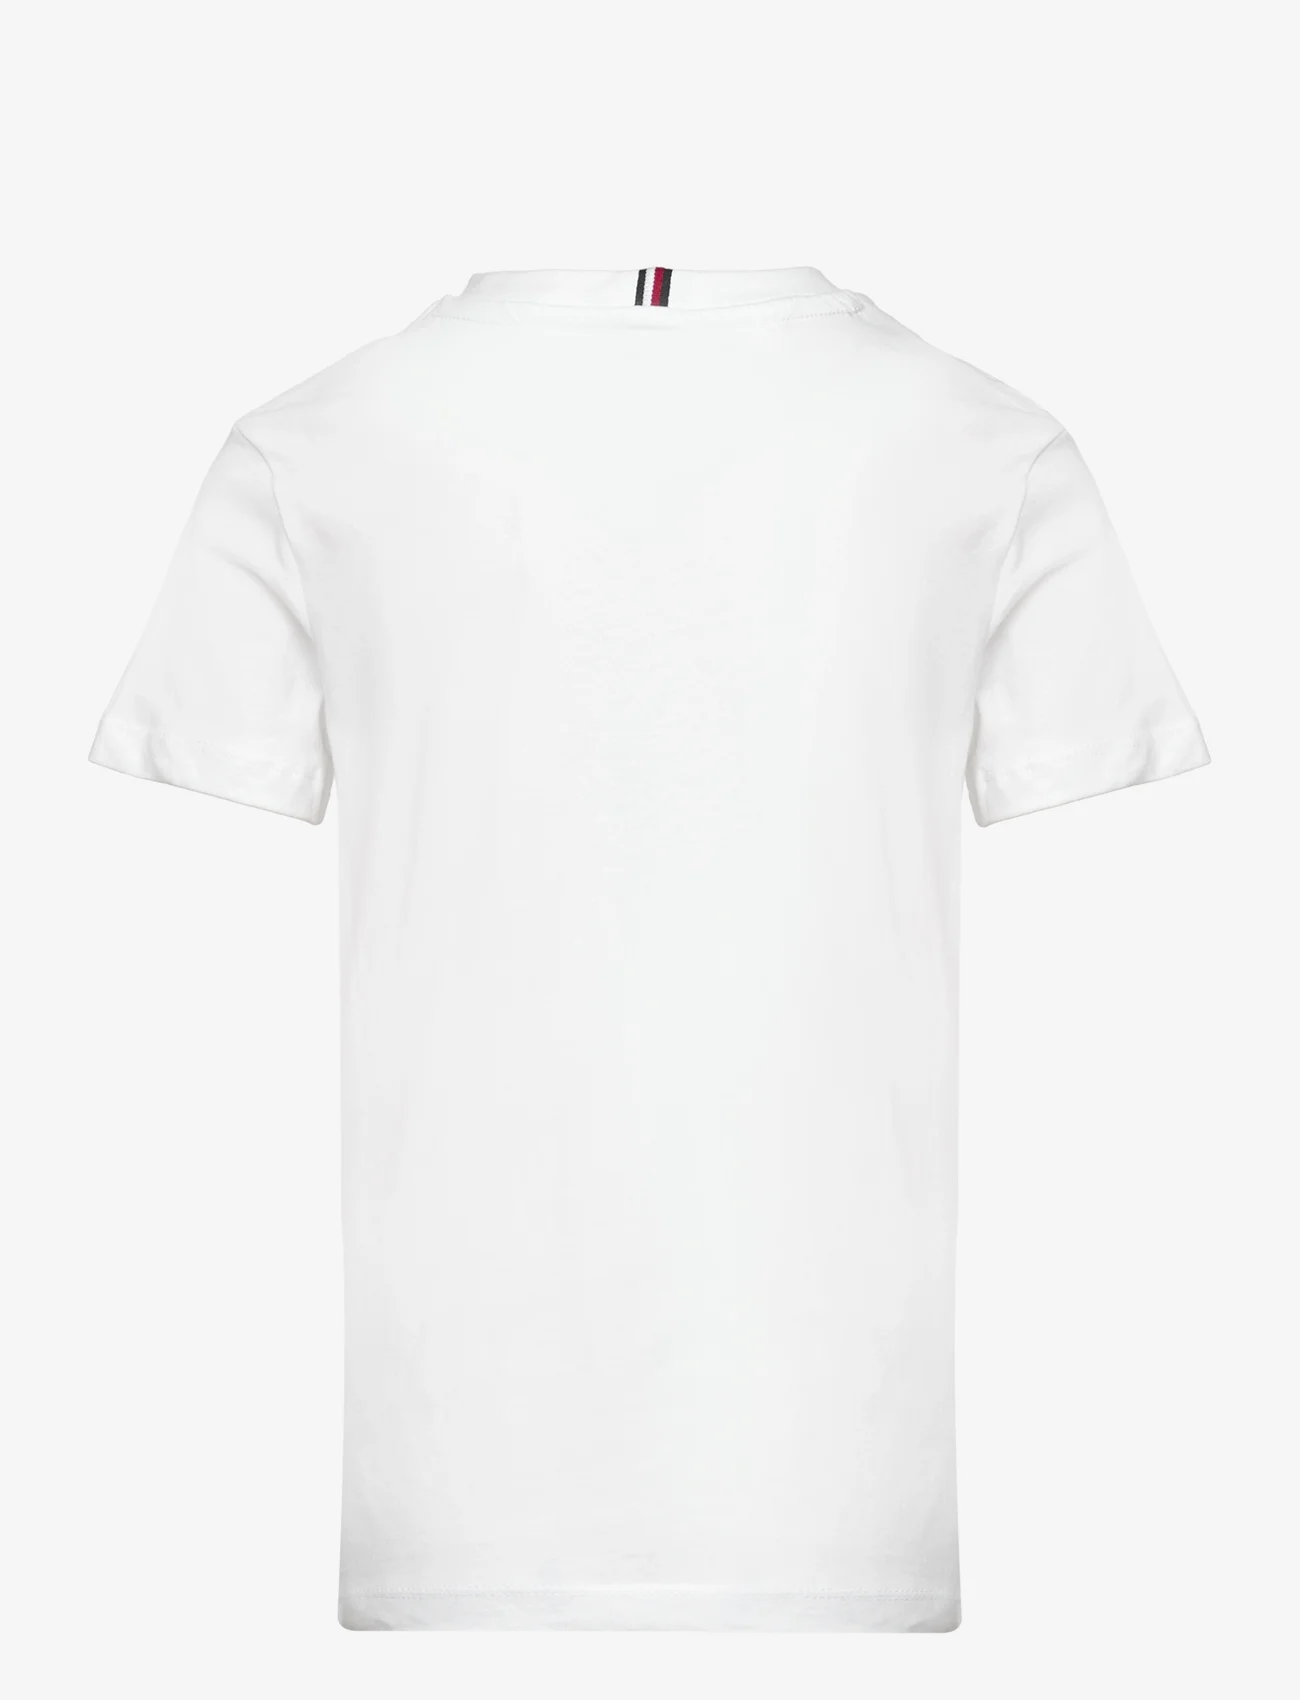 Tommy Hilfiger - TH LOGO TEE S/S - short-sleeved t-shirts - white - 1